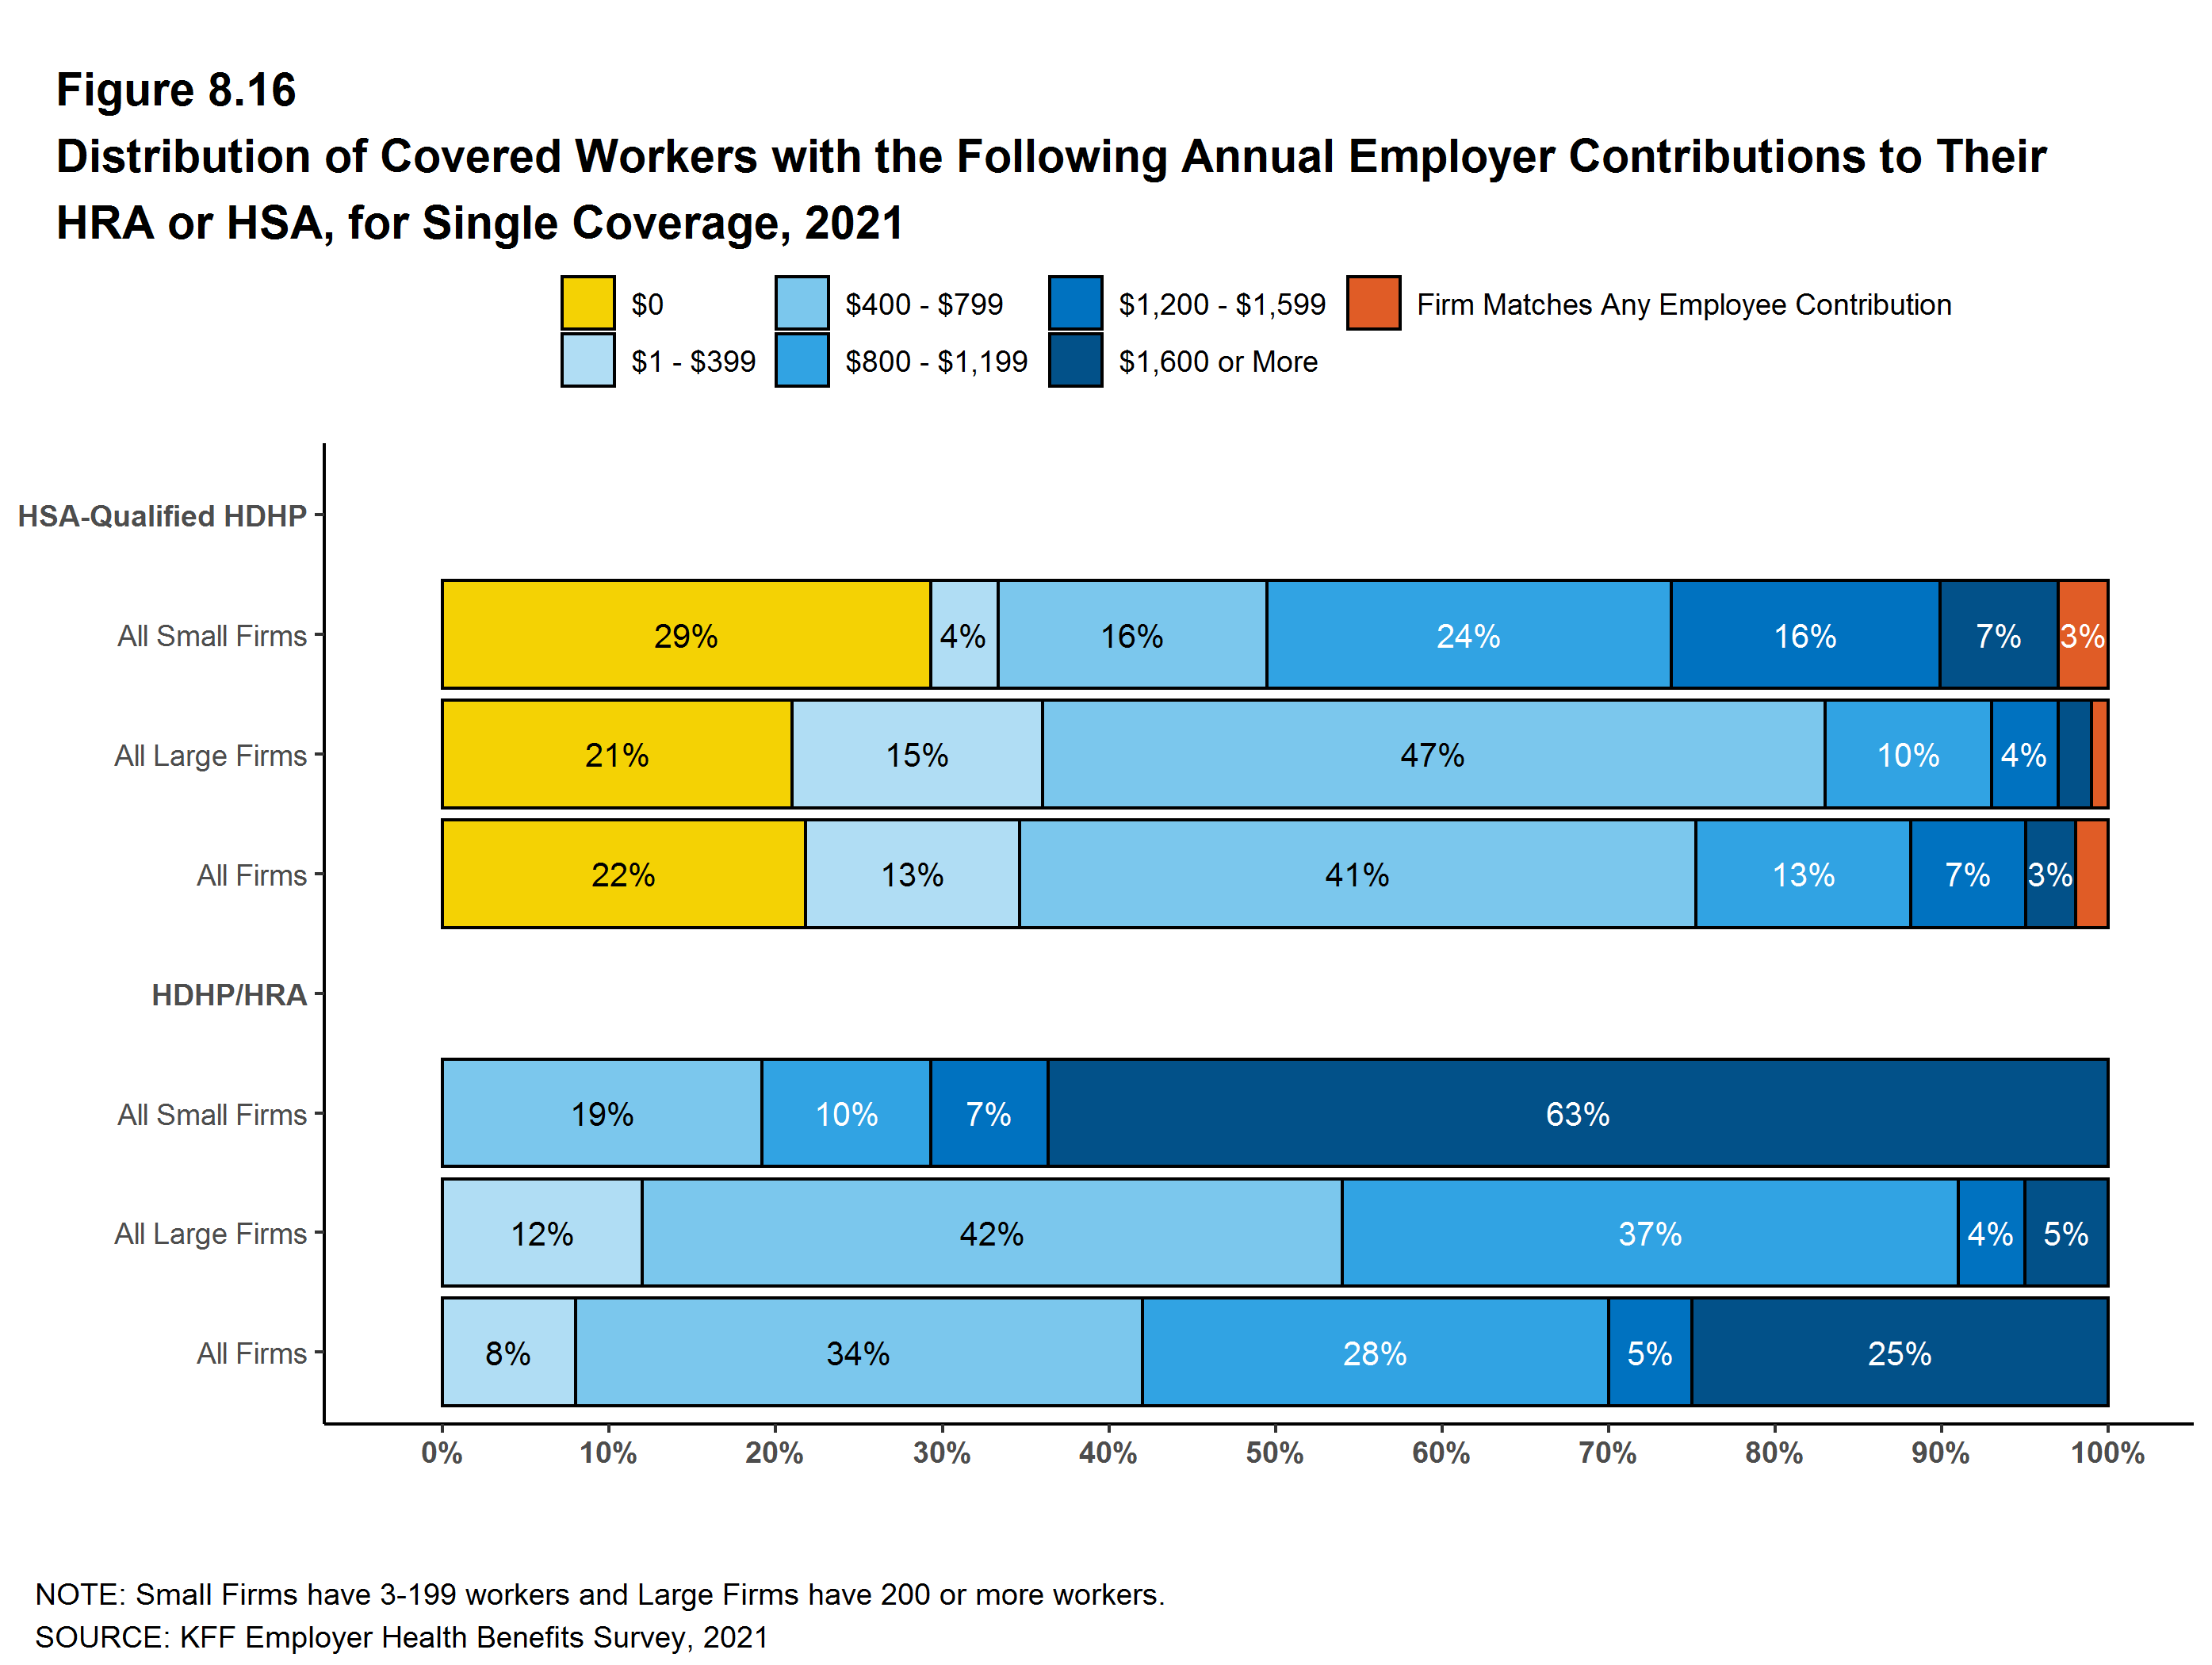 Distribution of Covered Workers With the Following Annual Employer